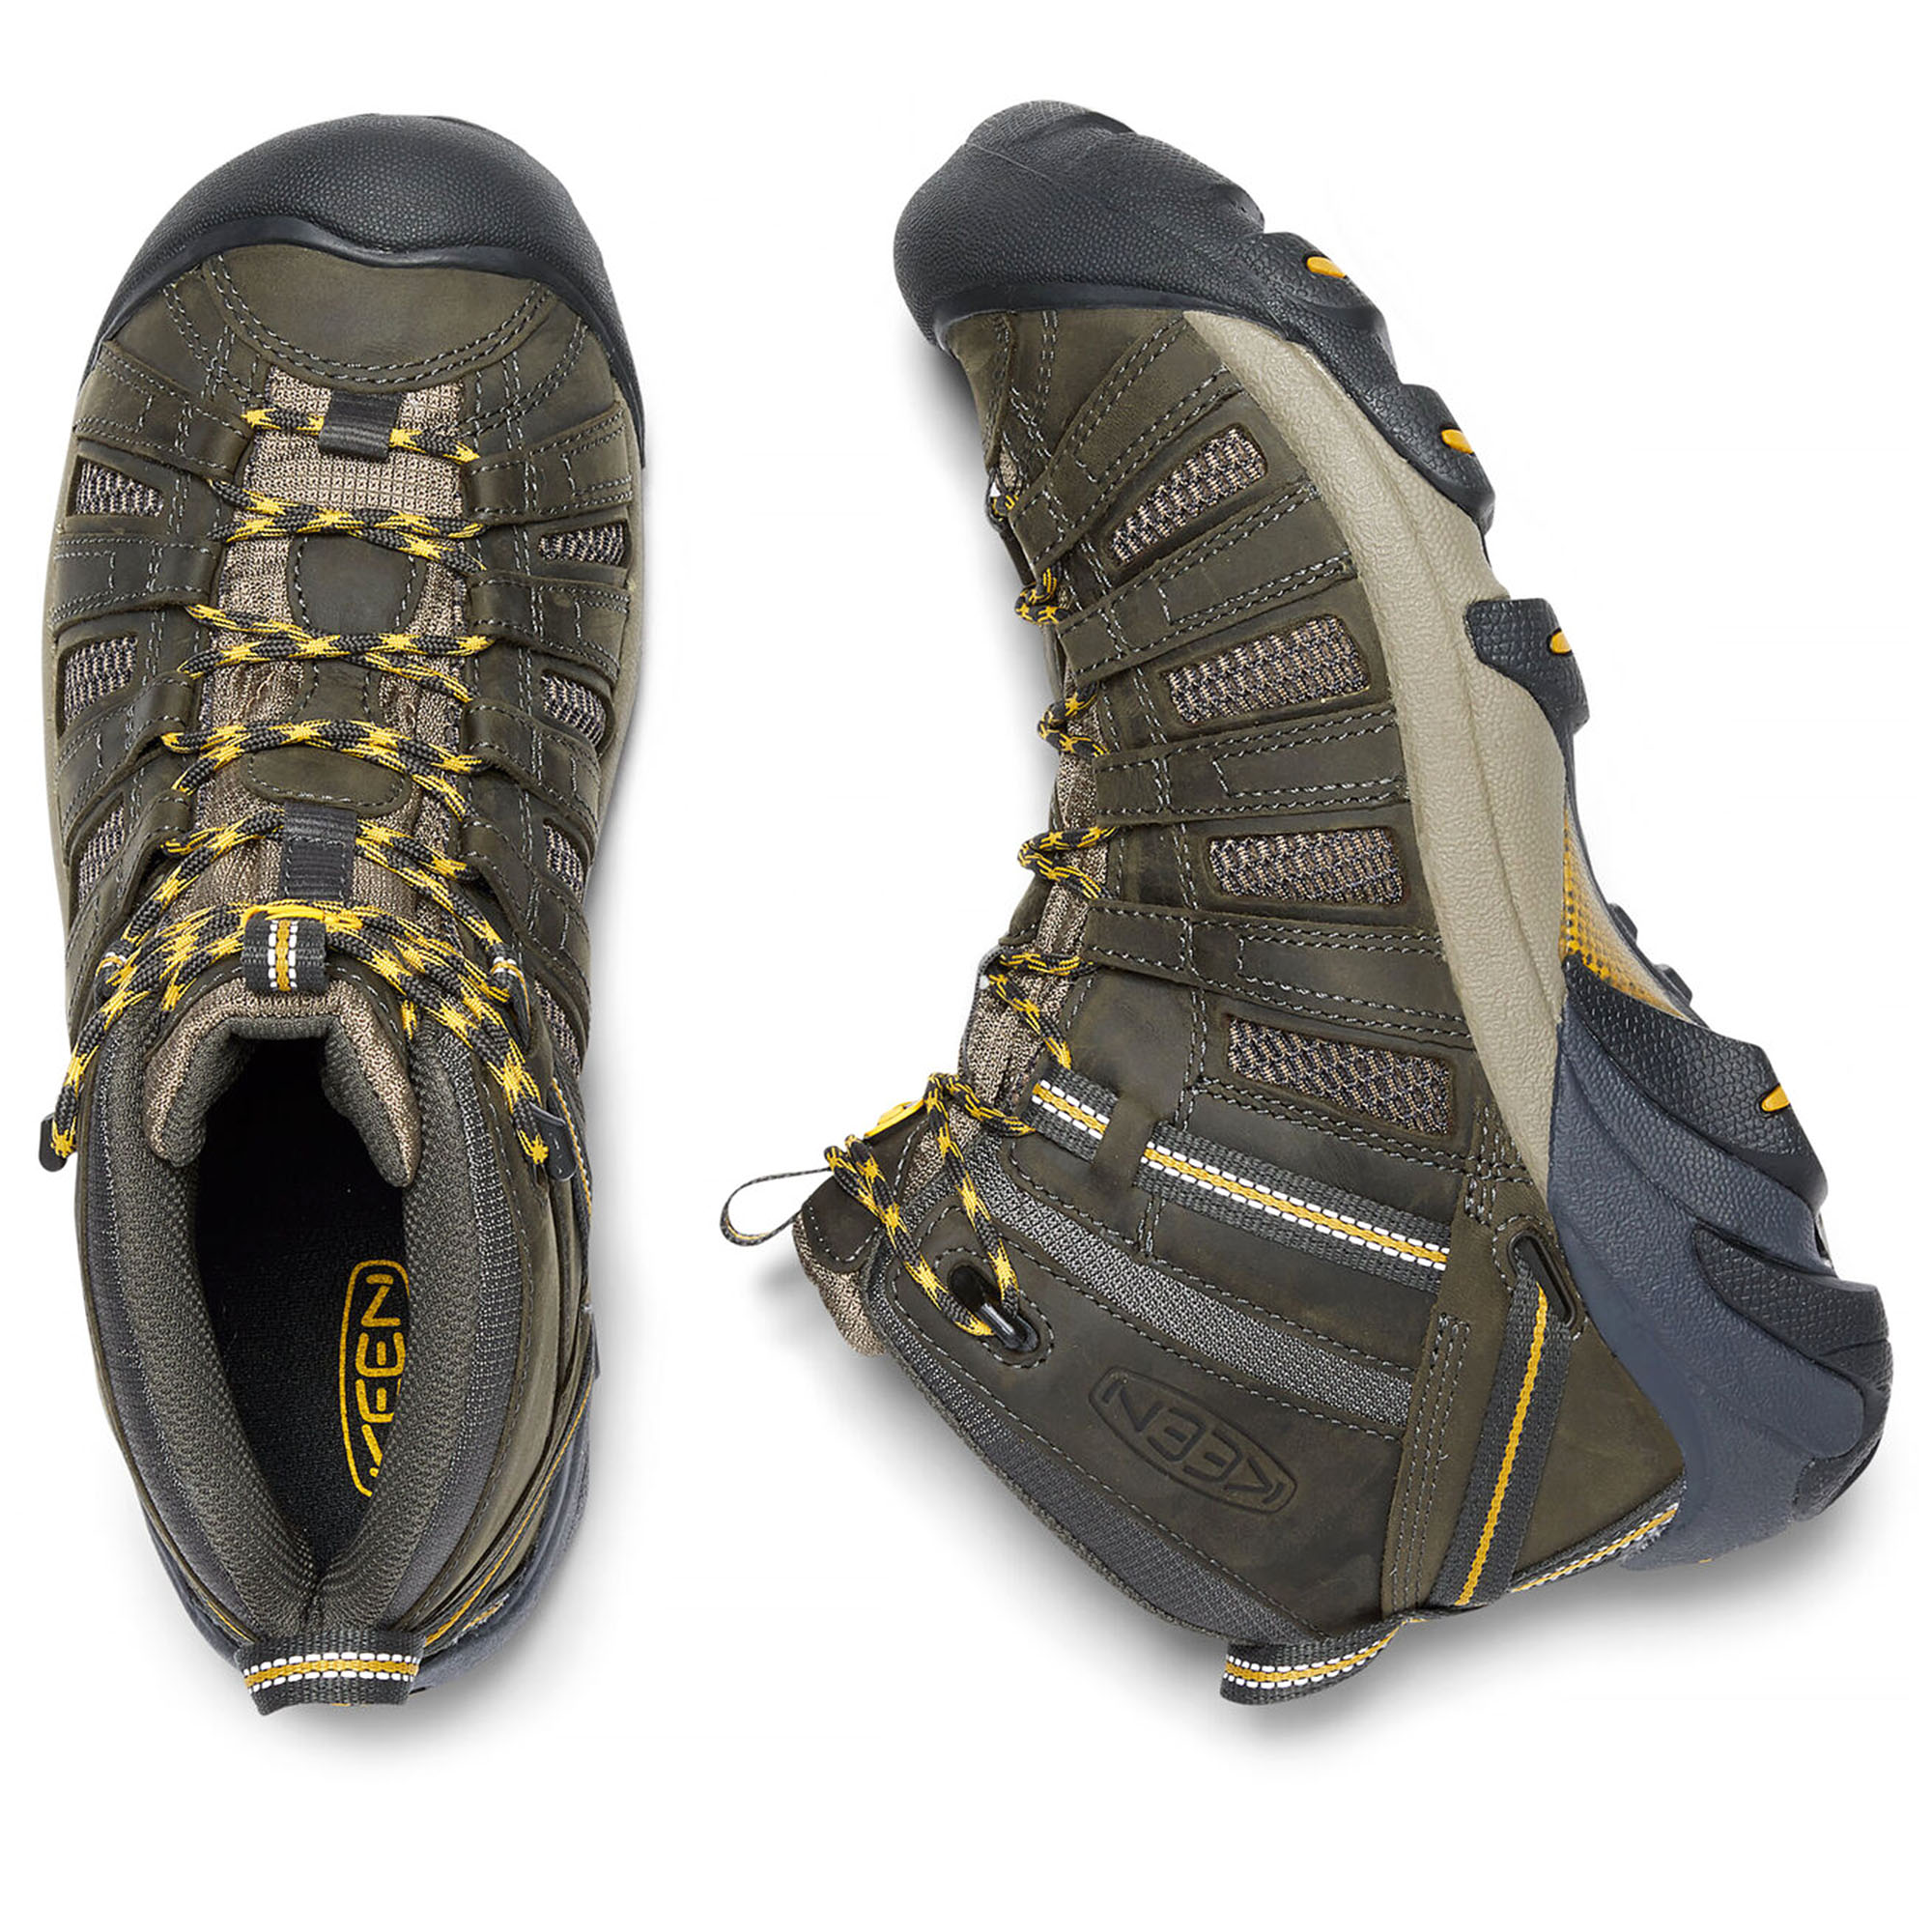 The Keen Voyageur Mid Hiking Boots Are Up to 45% Off - Men's Journal